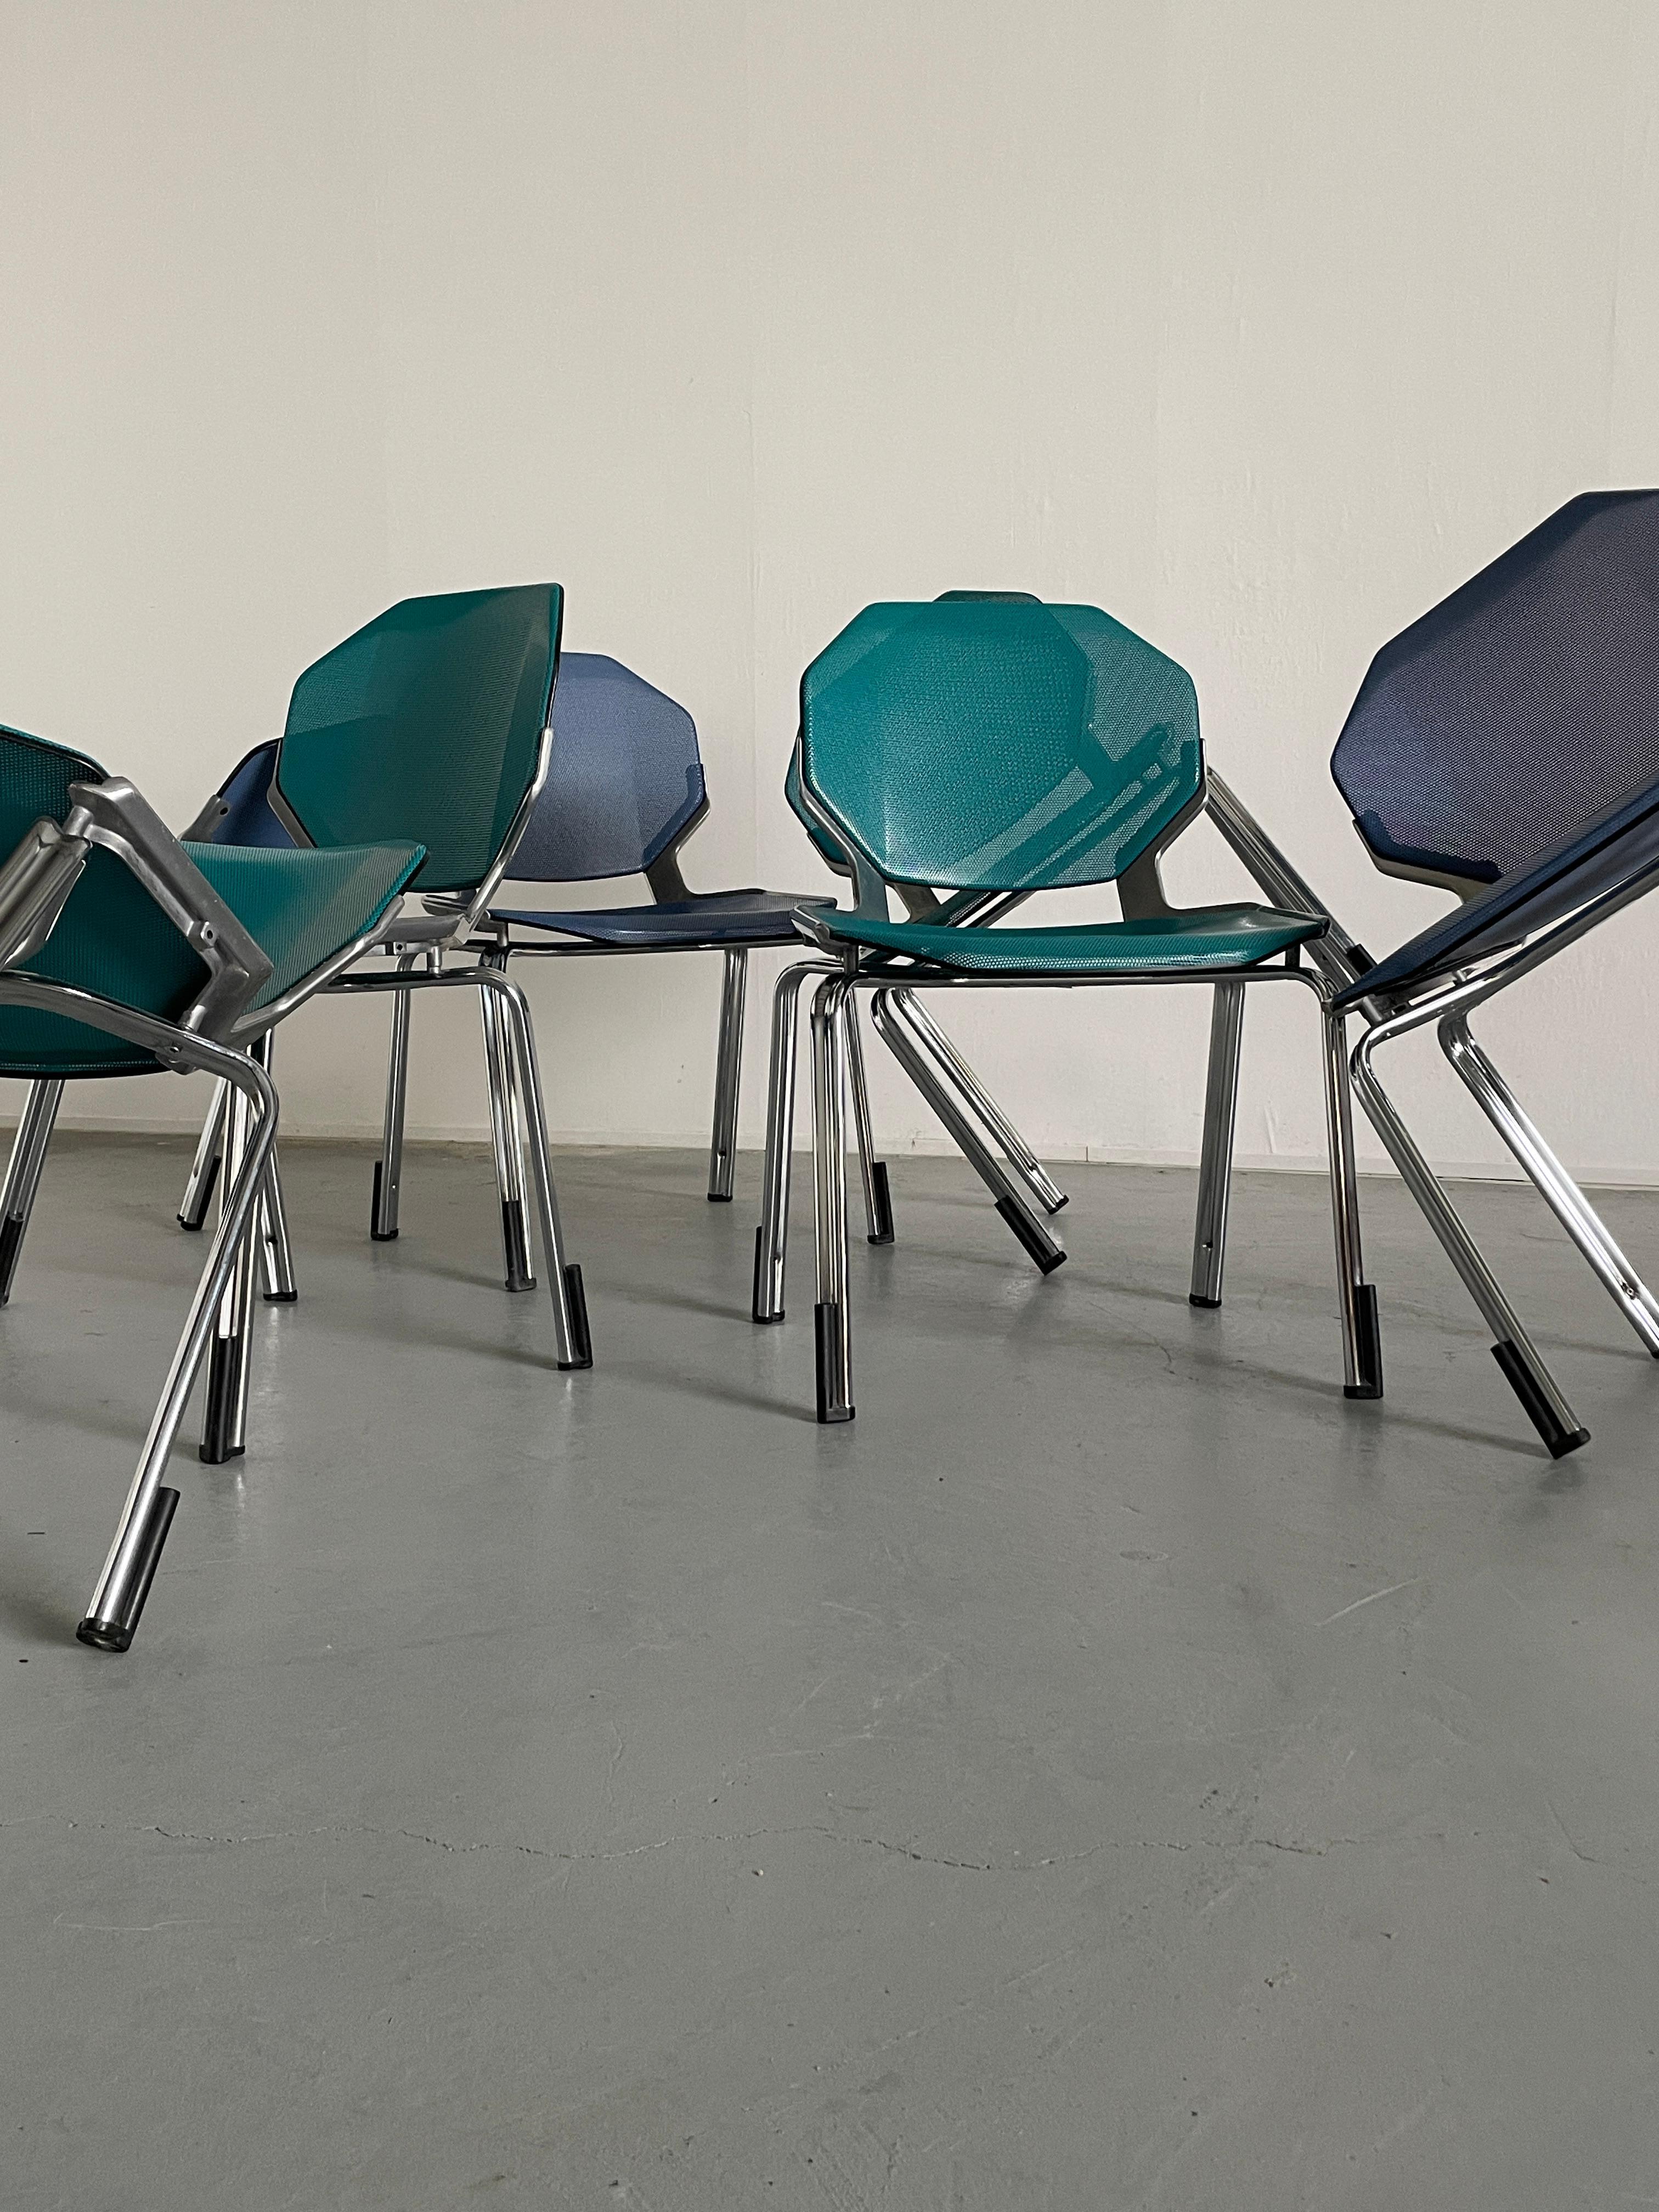 Space Age Futuristic Octagonal Stackable Dining Chairs by Fröscher Sitform, 90s For Sale 13